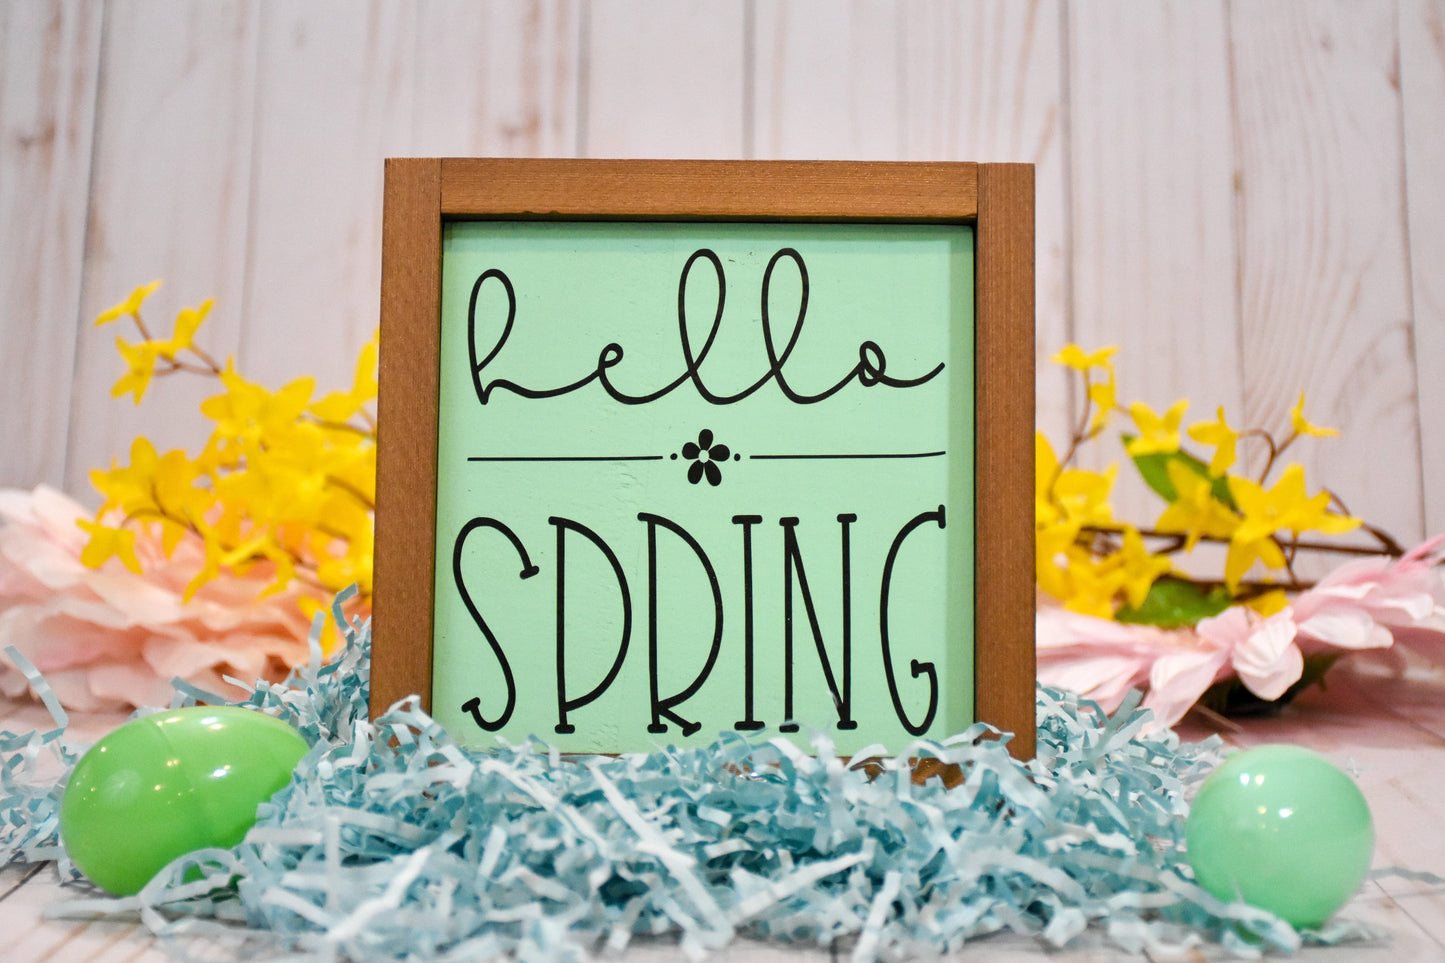 Hello Spring 5x5 Shelf Sitter Signs- Share Your Hobbies, Great for Gifting! Sassafras Originals